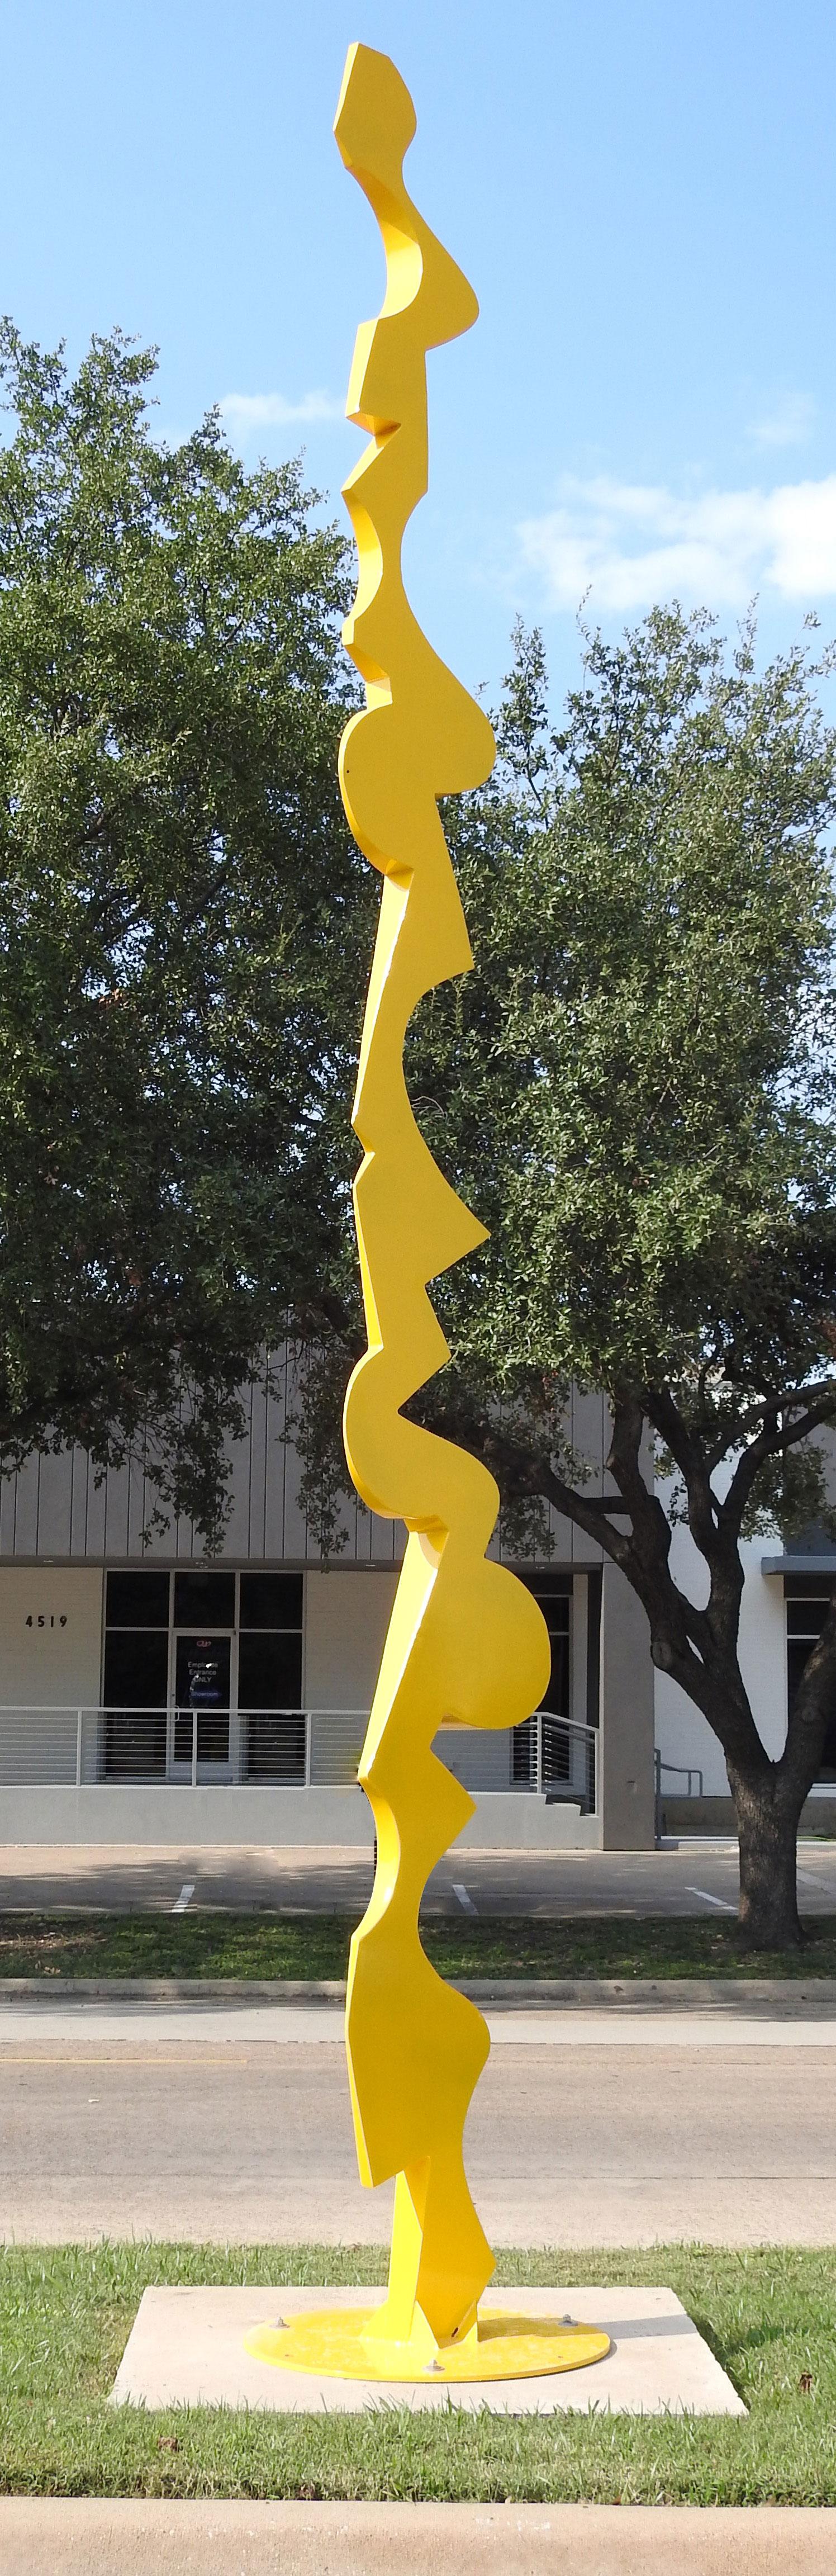 "Live Together, Die Free", Nic Noblique, Large Yellow Steel Sculpture, 288x36x36